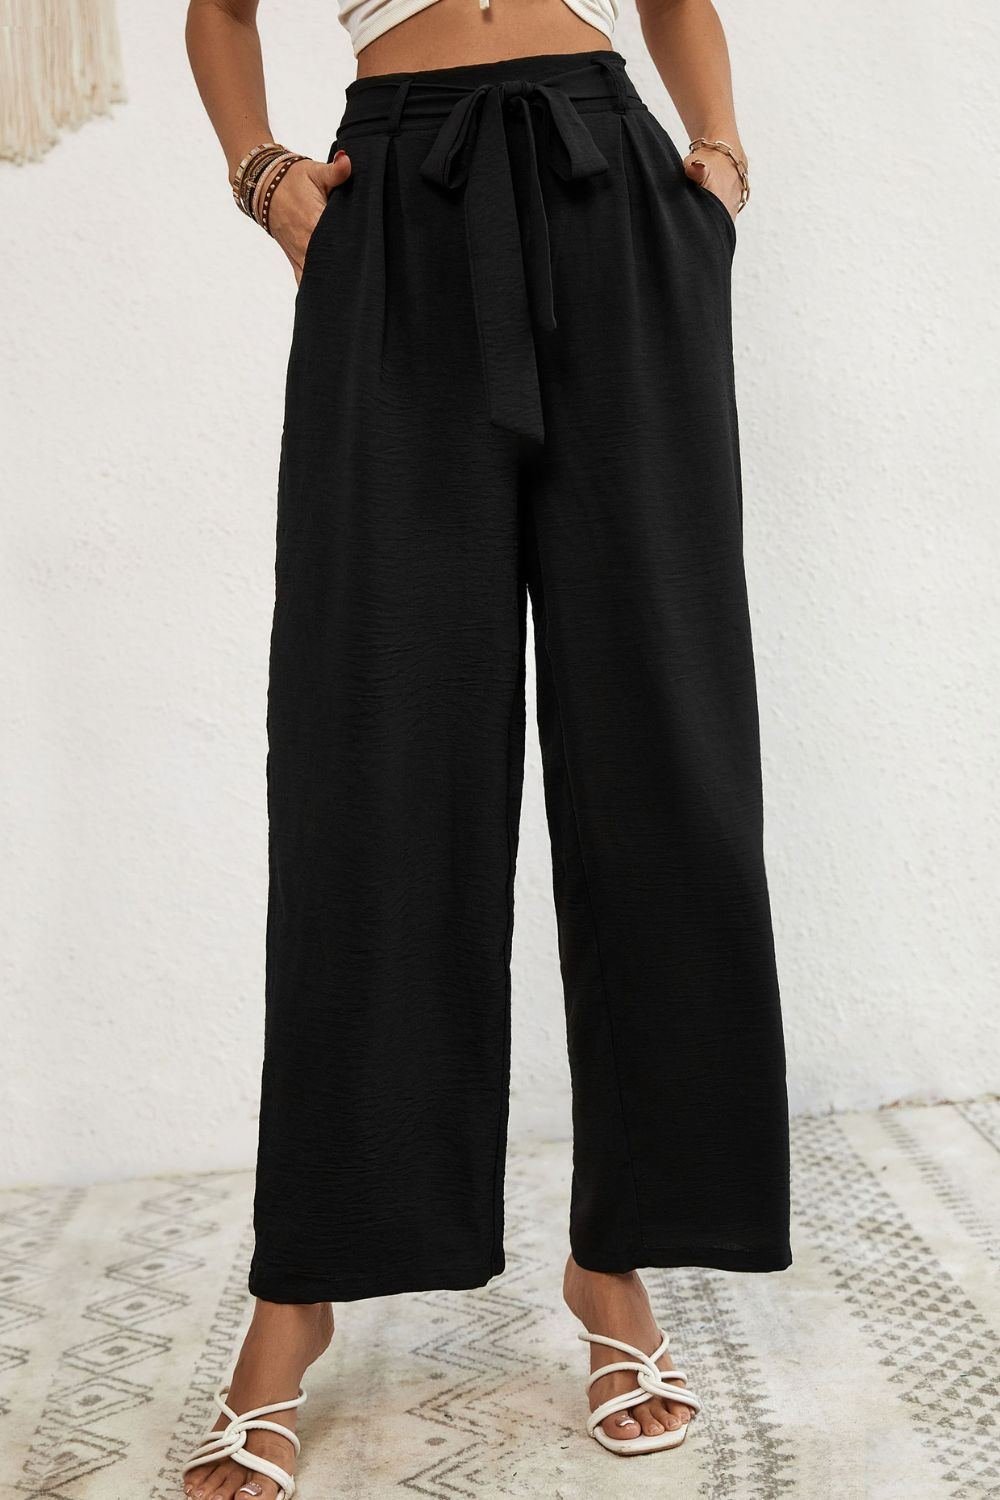 Polly Pleated Wide Leg Pants with Pockets